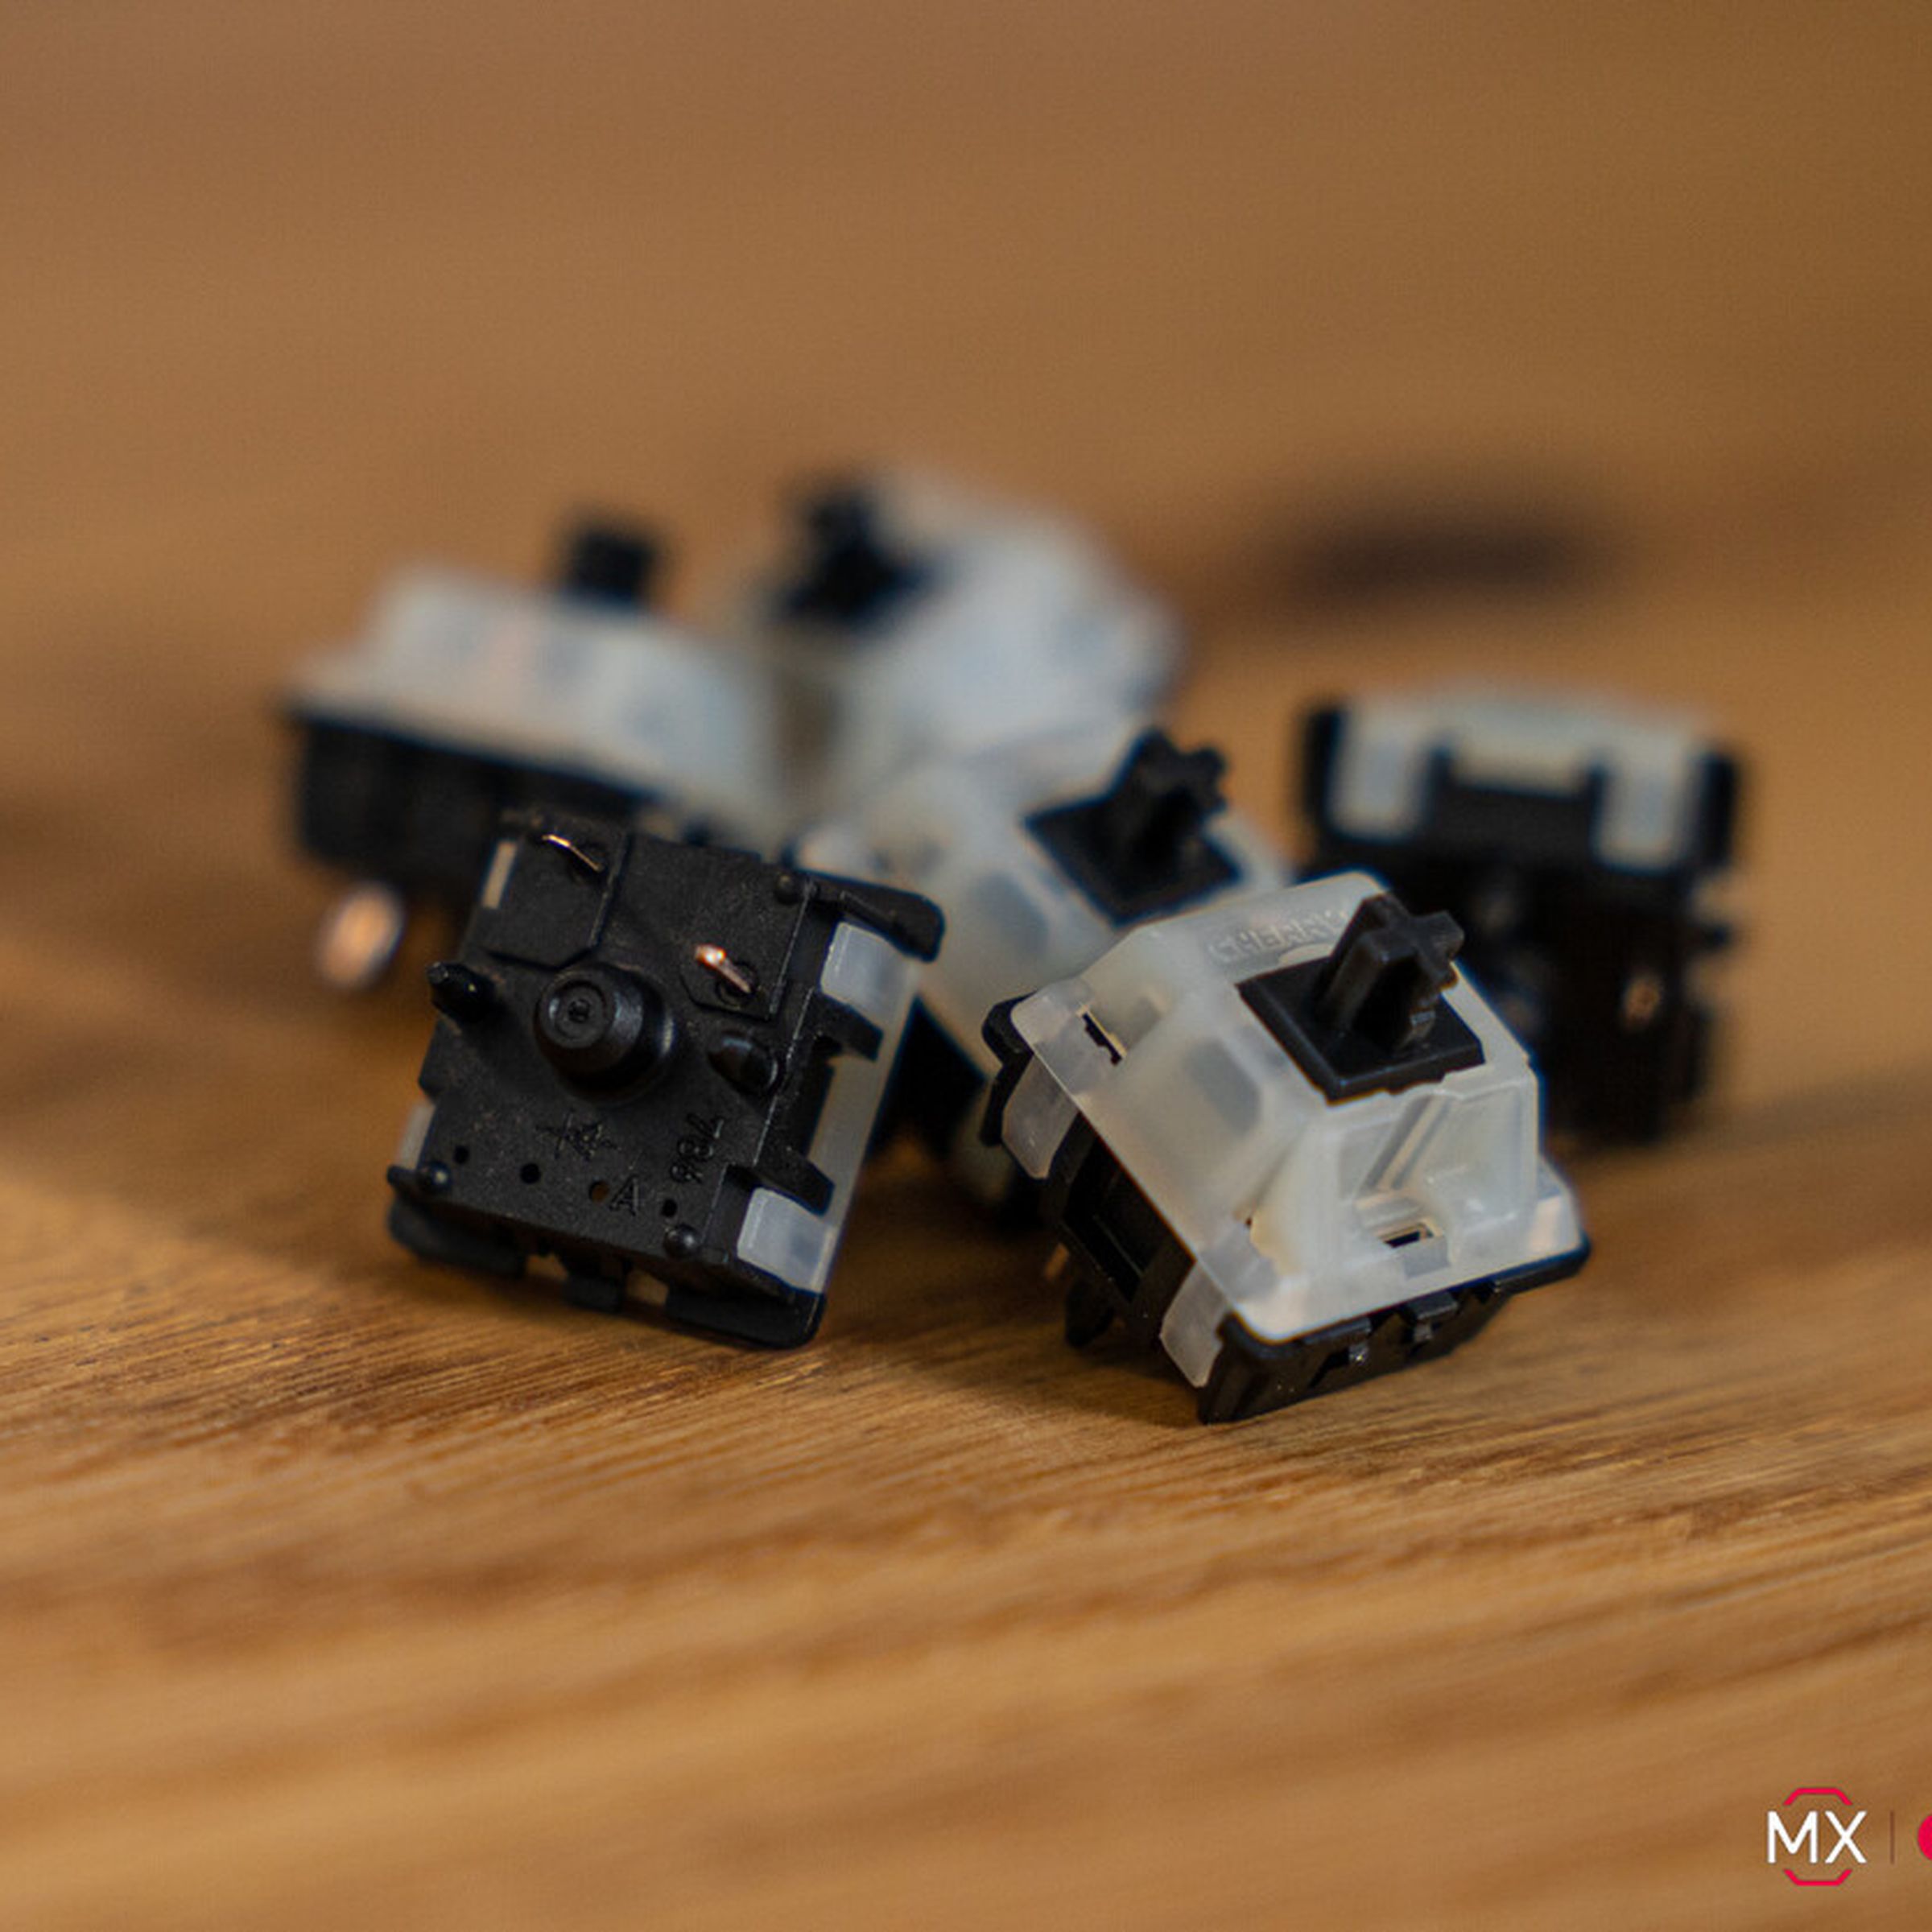 A small pile of keyboard switches.